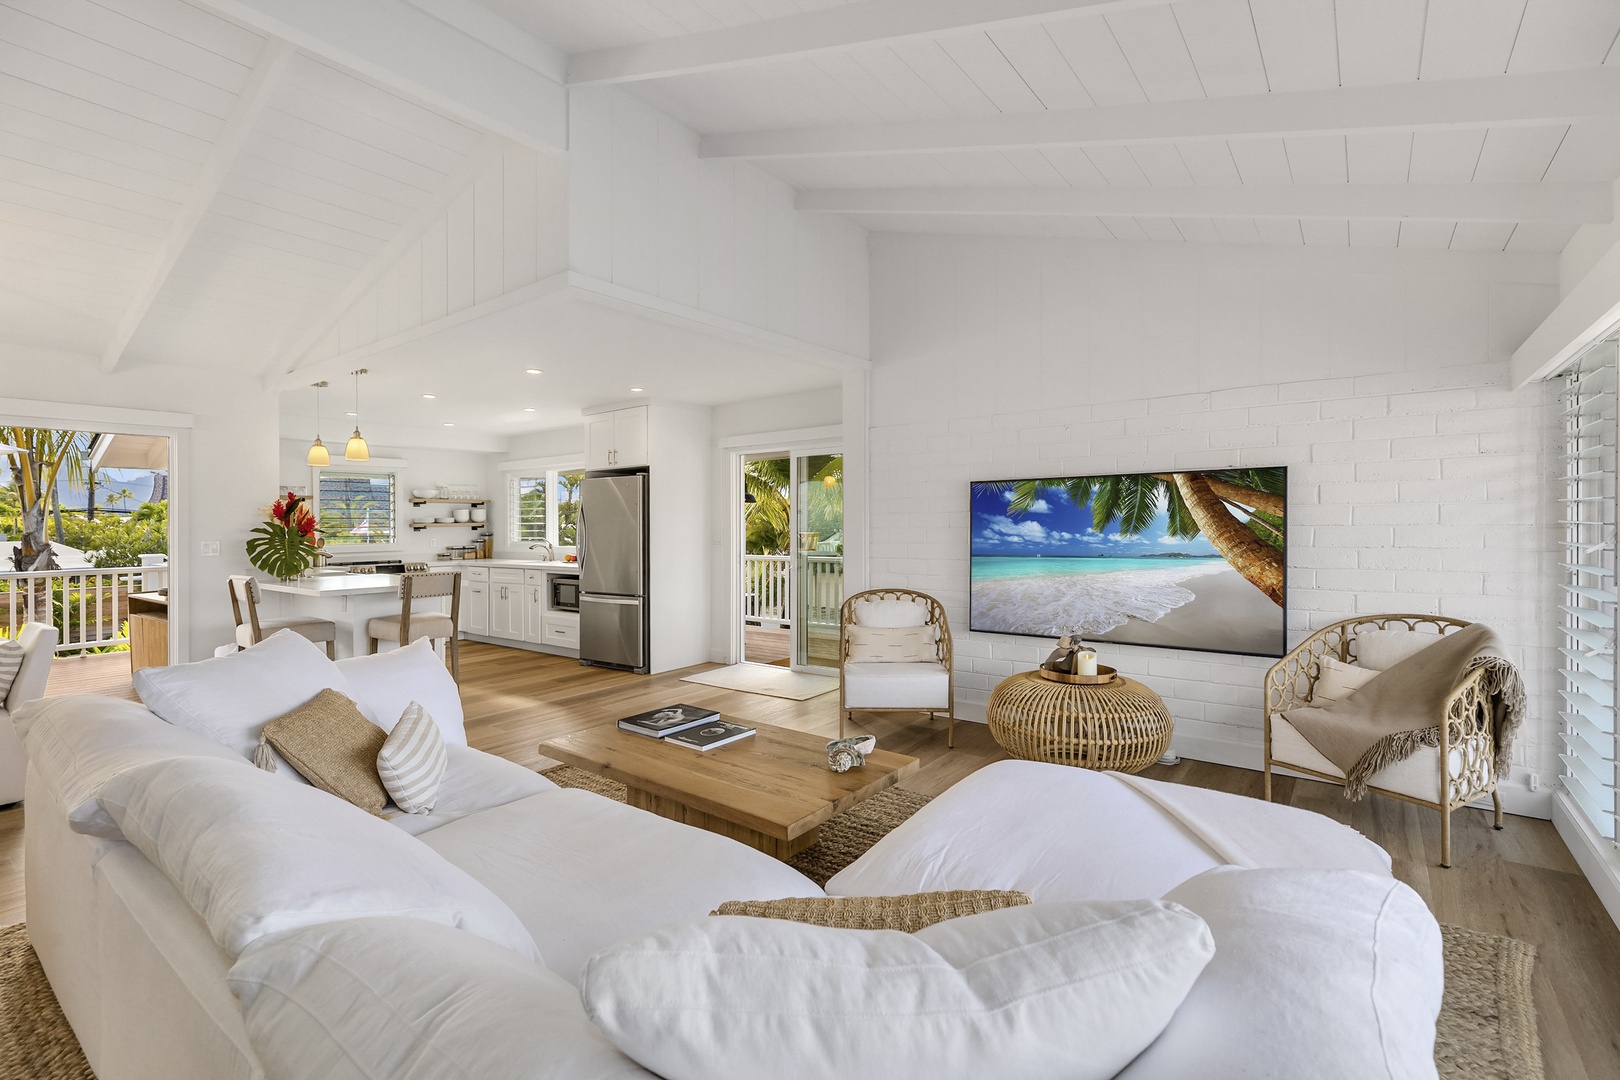 Kailua Vacation Rentals, Seahorse Beach House - Enjoy a movie night or catch up on your favorite shows